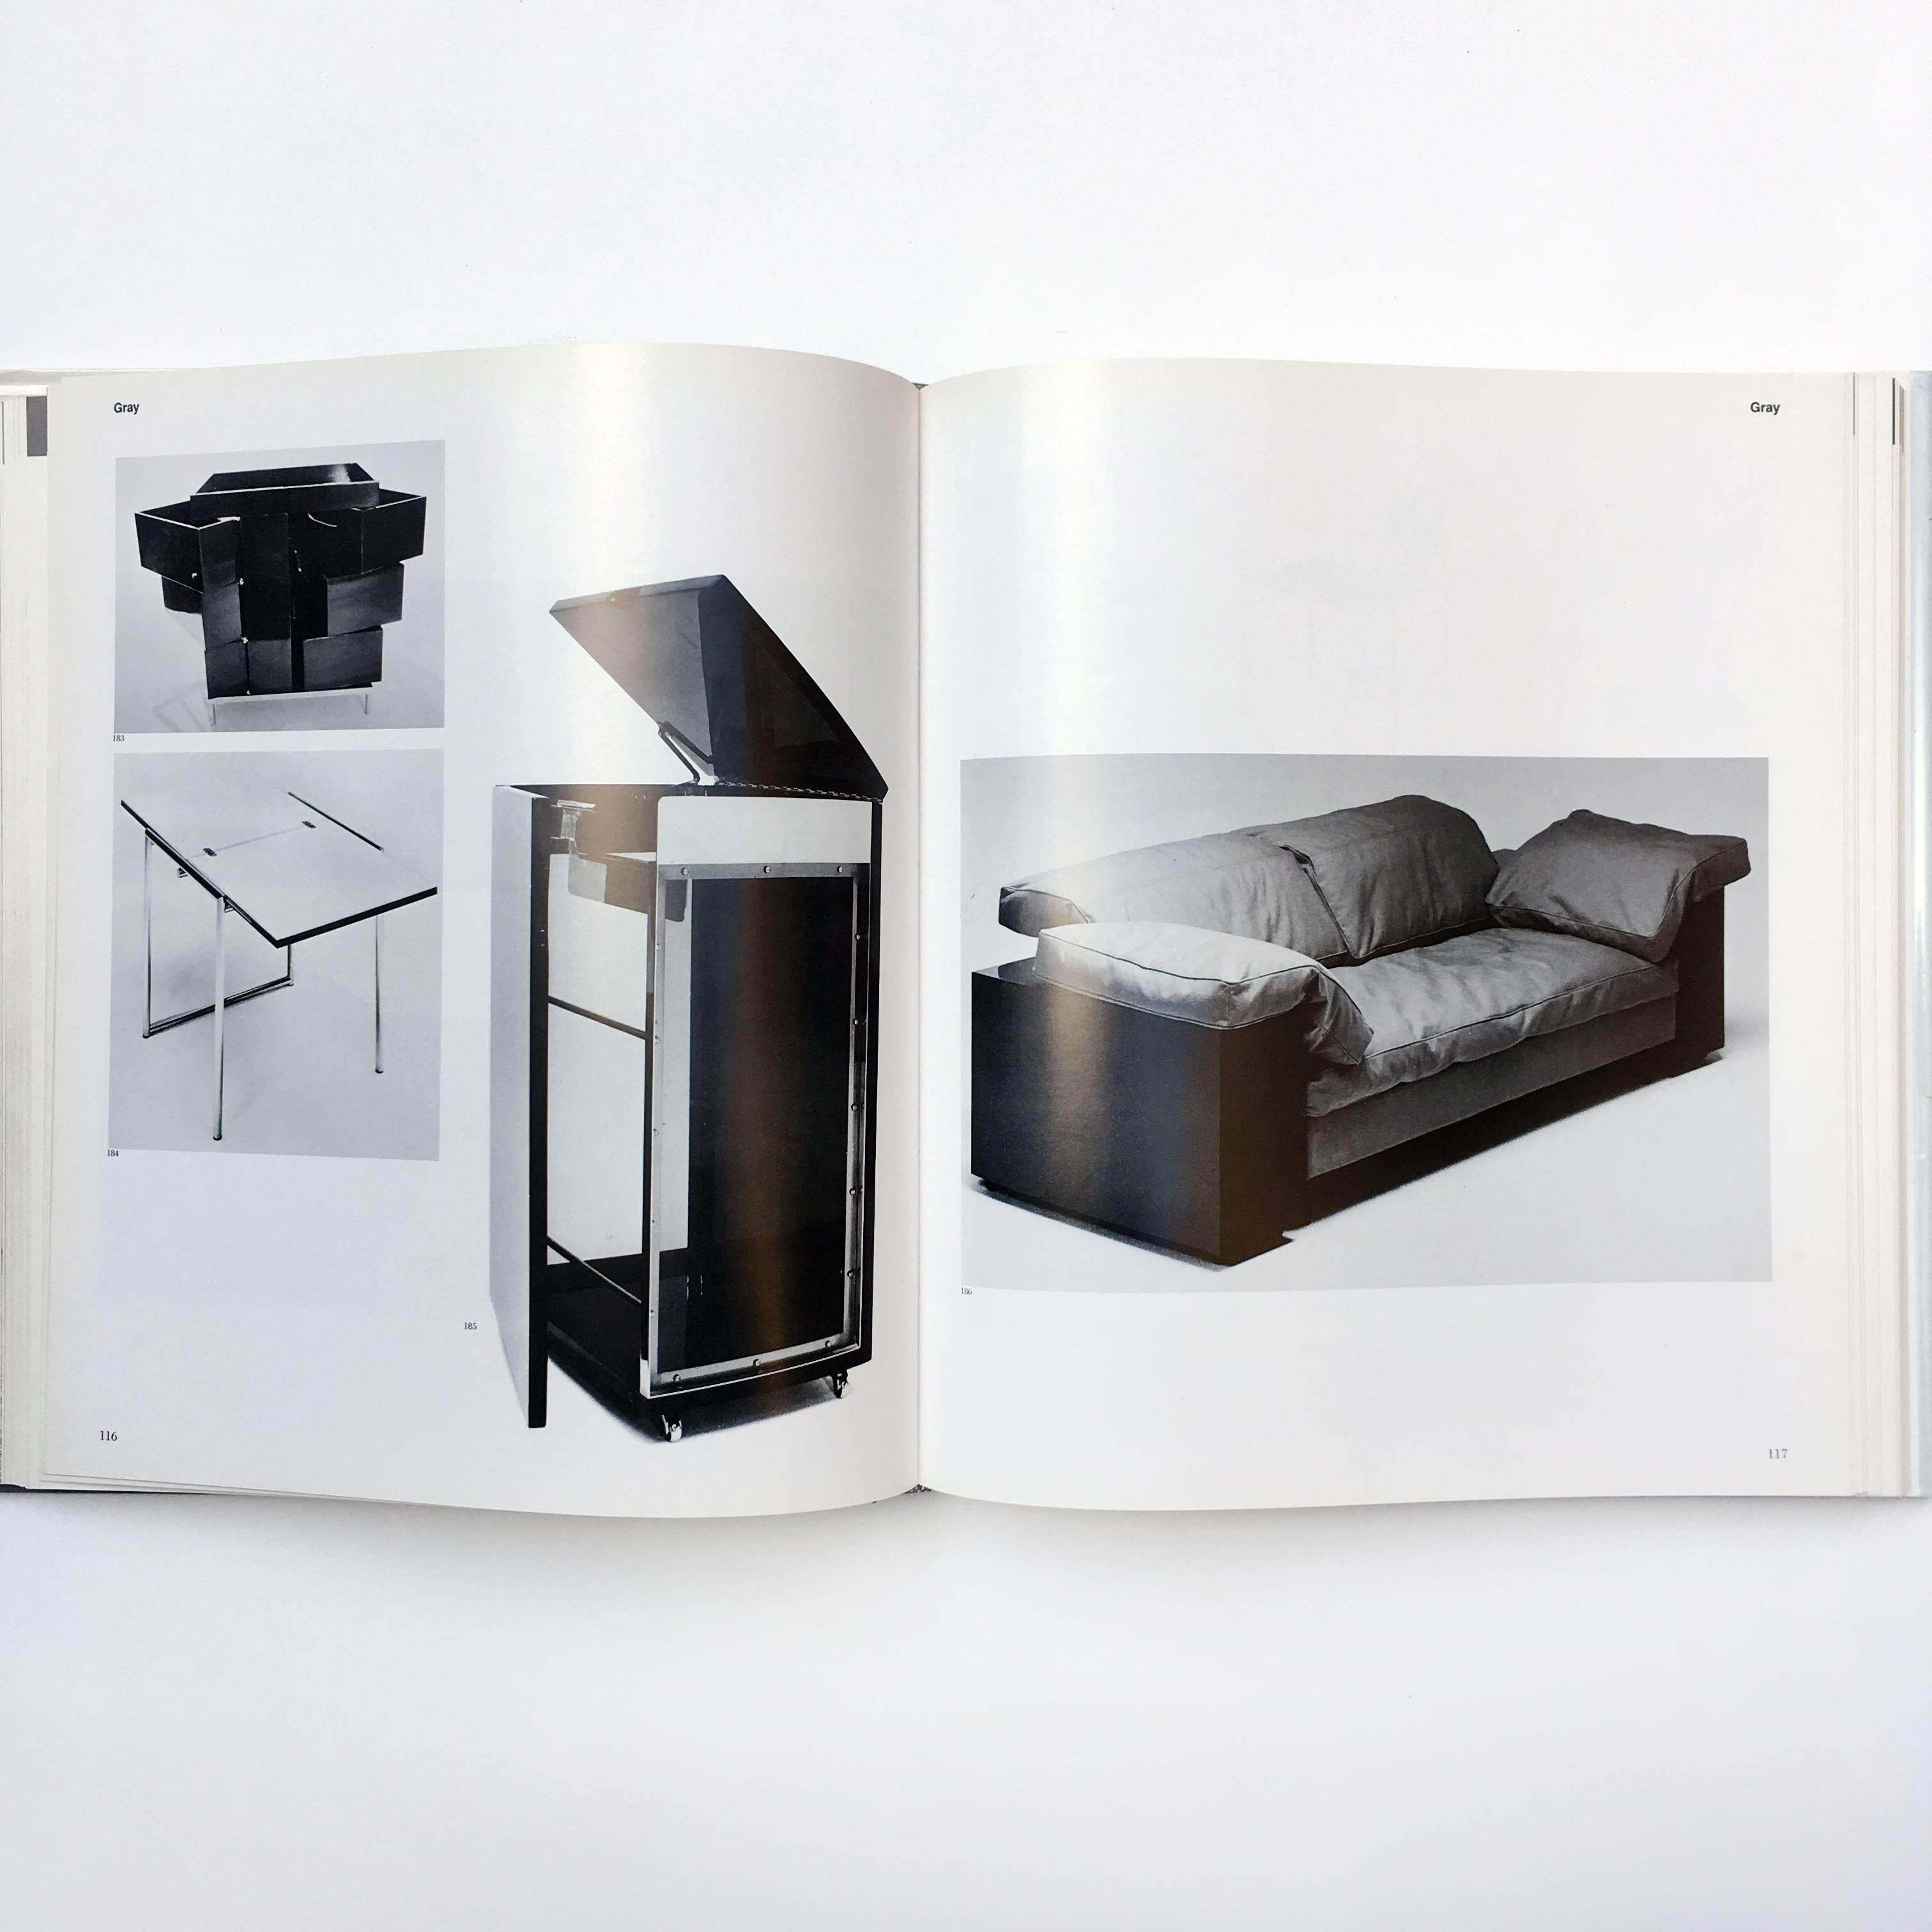 Published by Abrams, 1st Edition 1983.

The idea of the architect as total designer dates to the eighteenth century using their vision to design not only the structure but also the interior. This book includes 600 pieces of furniture and home